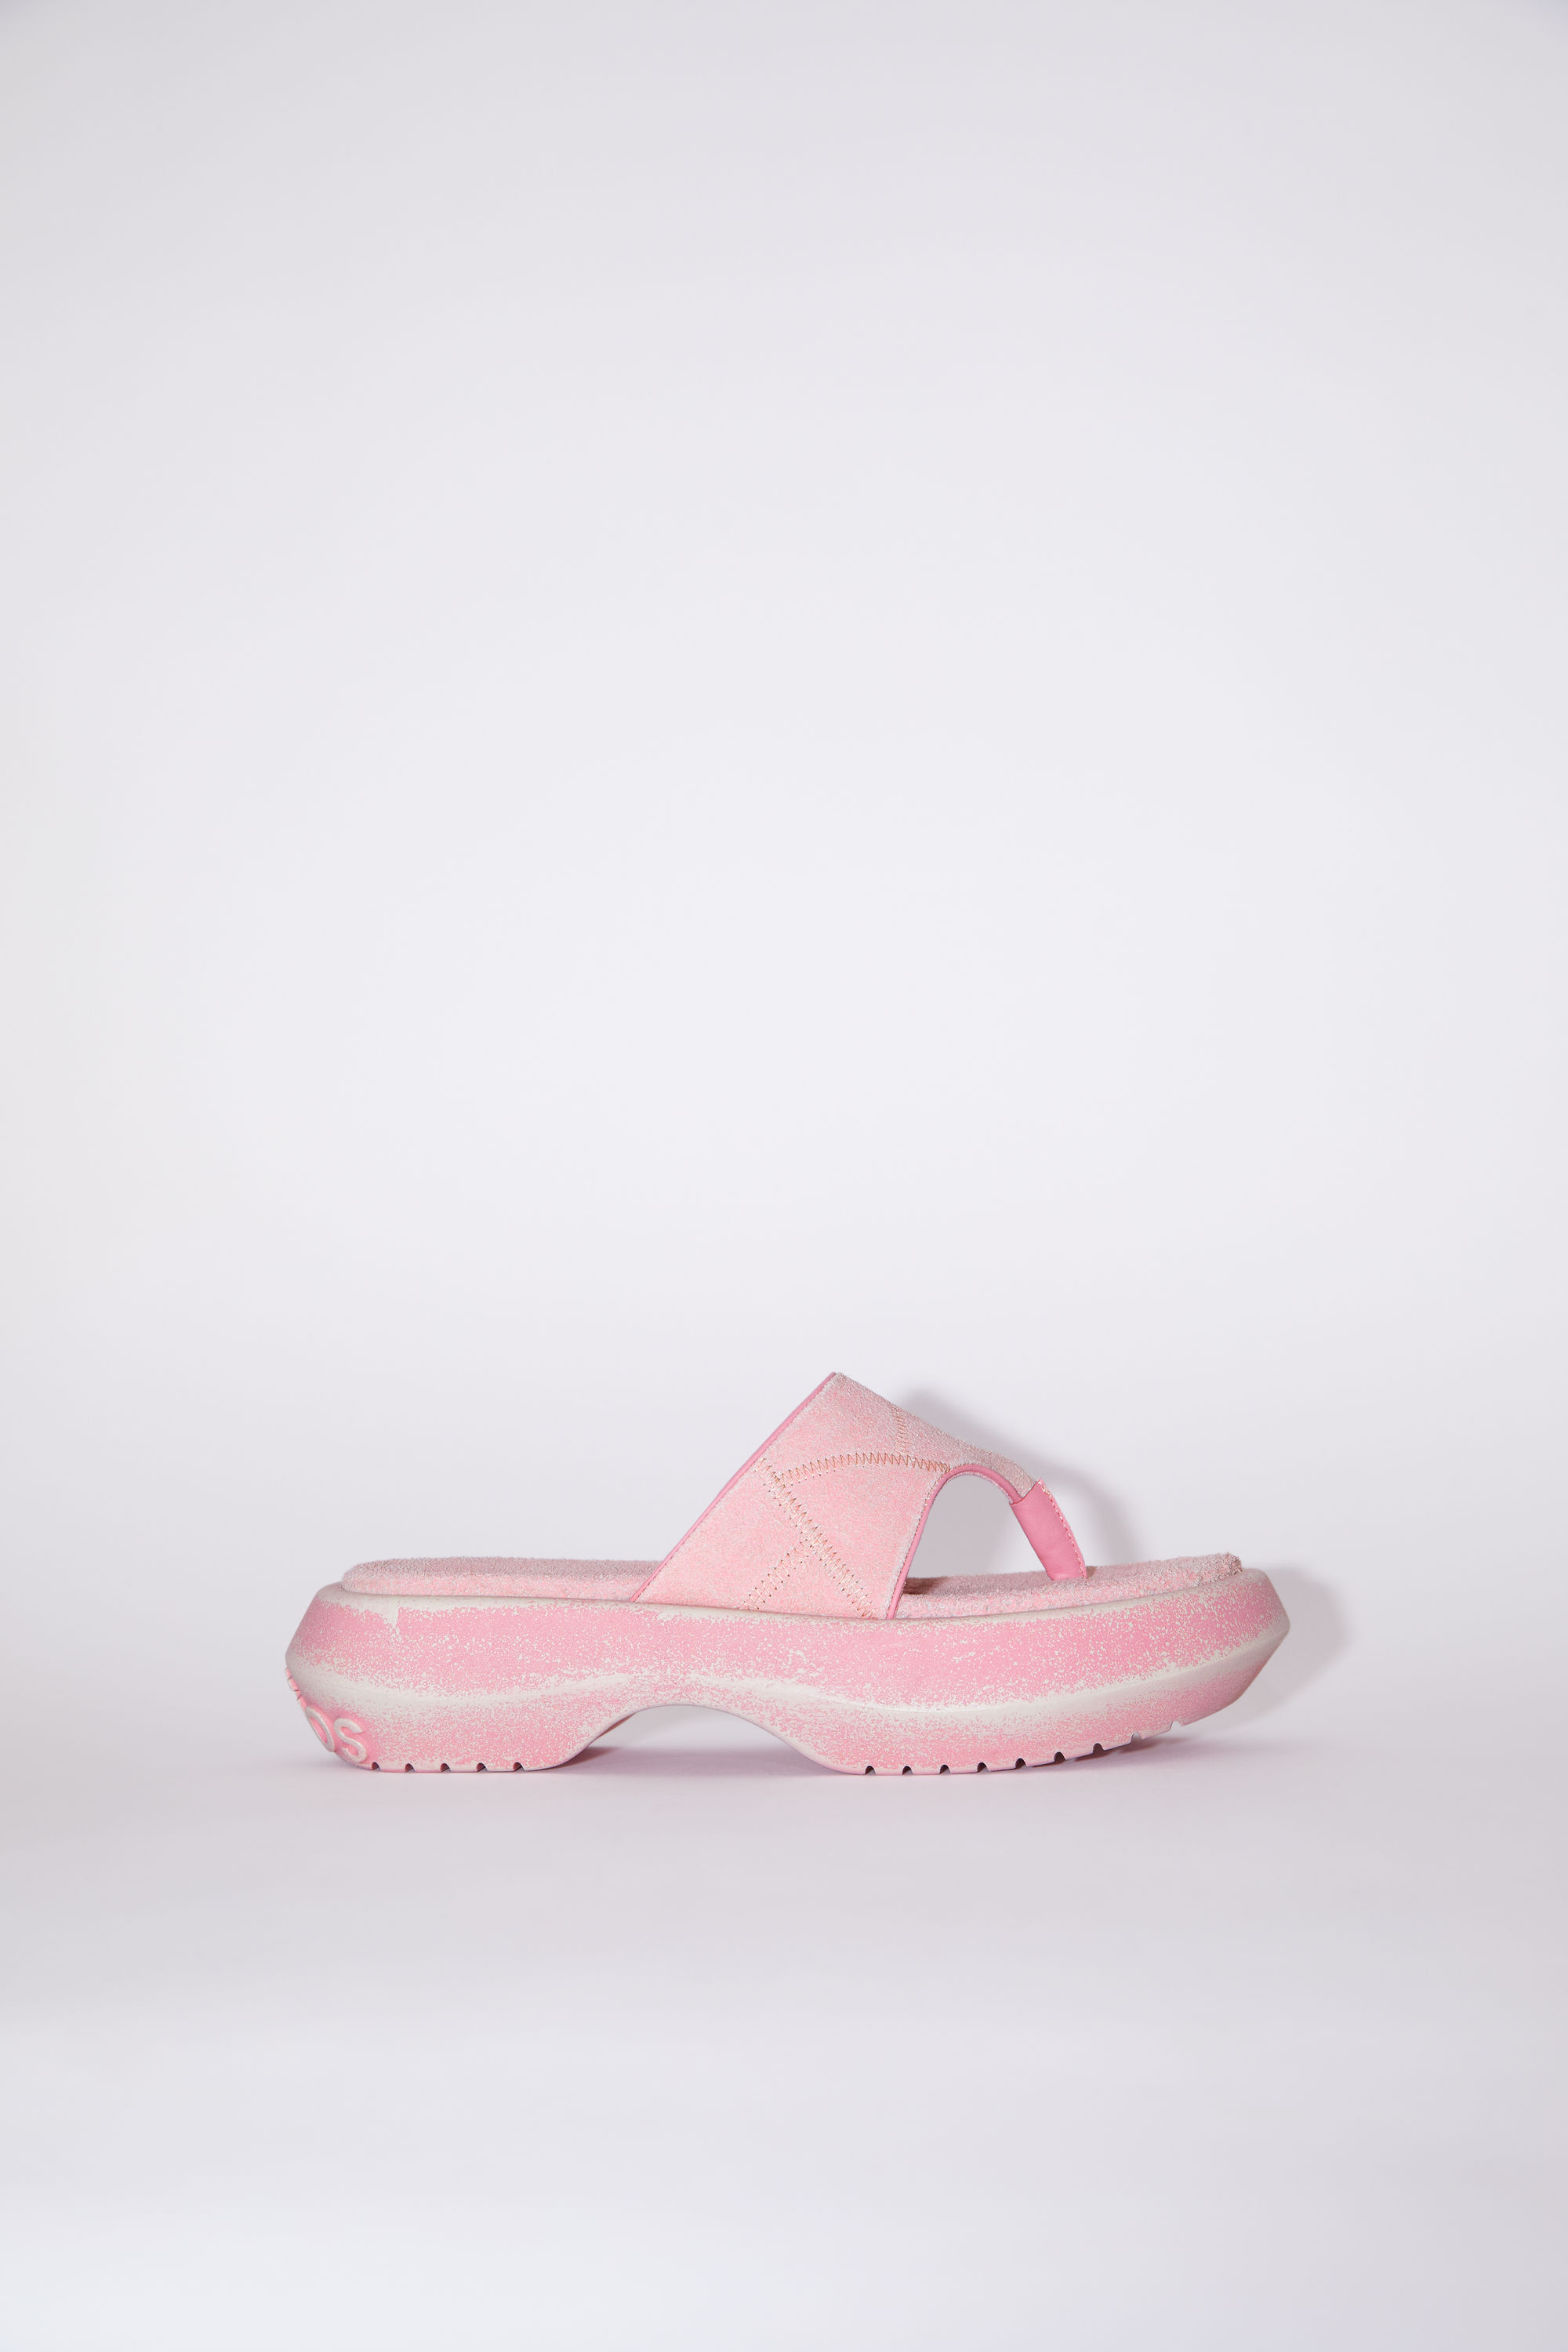 Acne Studios Reversed Leather Sandals In Blush Pink